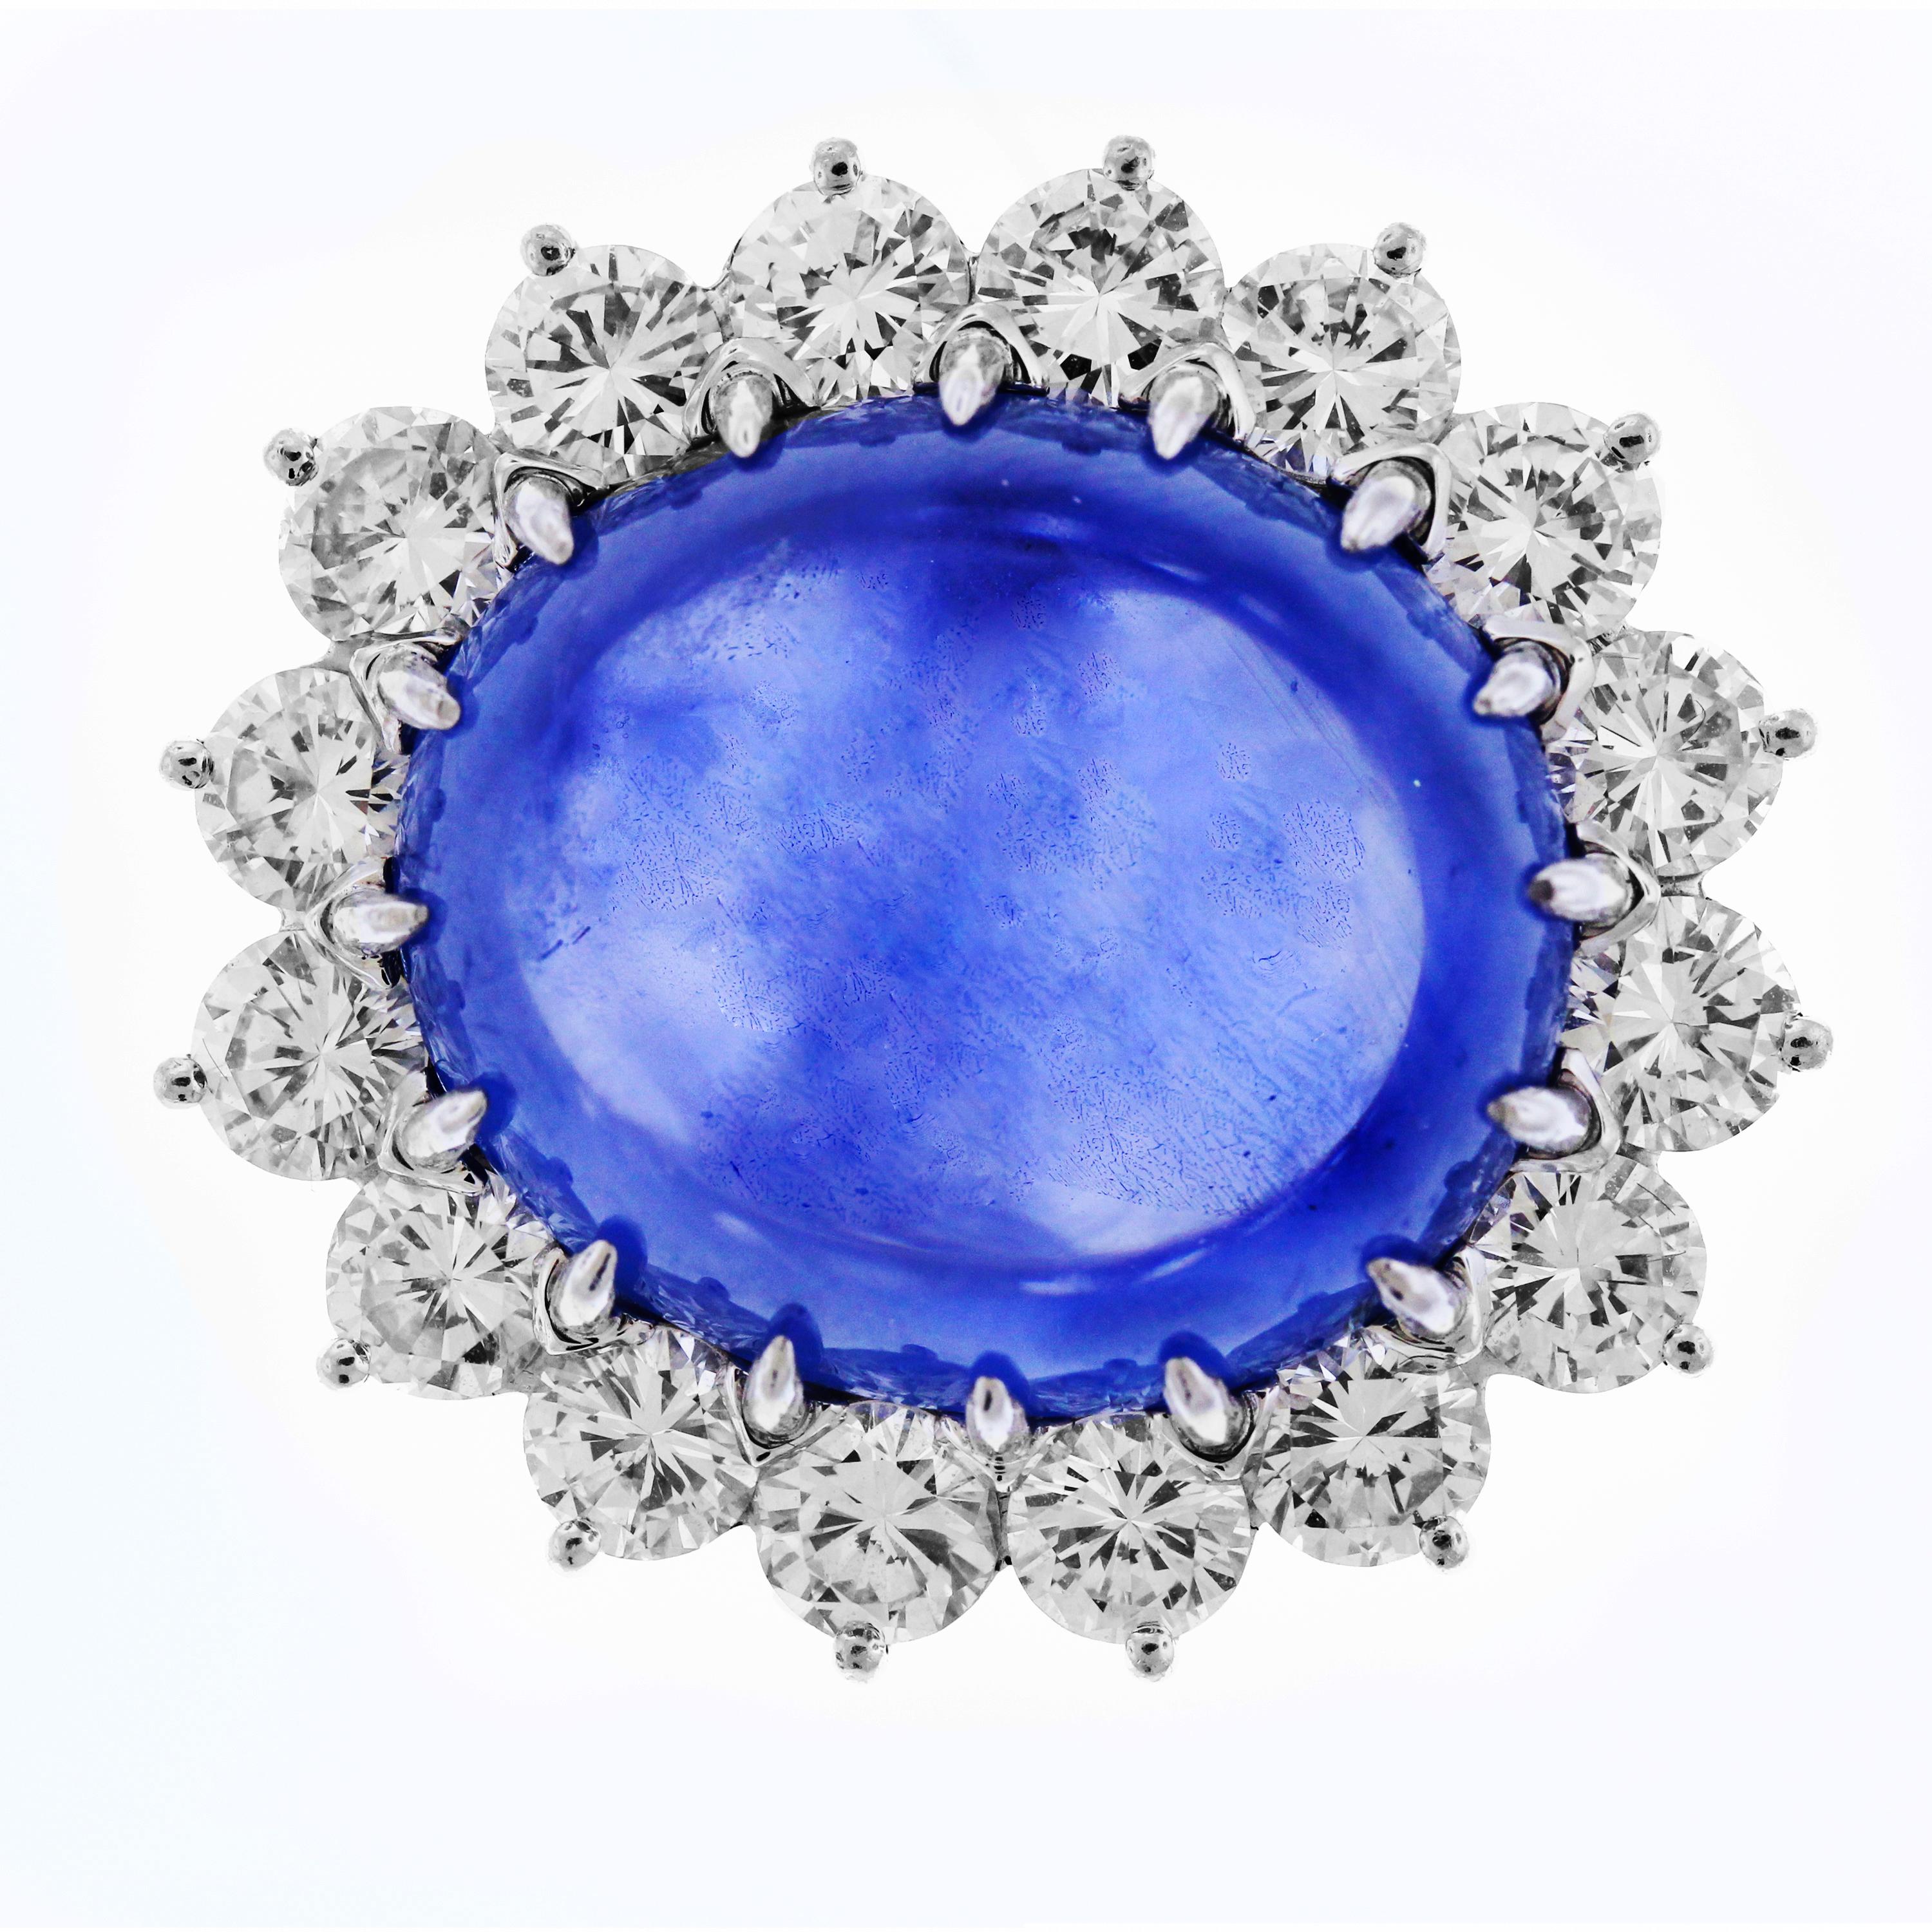 Platinum Ring with Top Quality Cabochon Sapphire center and Diamonds

This Cabochon Sapphire is truly top gem world class with truly remarkable color and clarity

Sapphire weighs apprx. 25 carats and is an oval cut. 19mm x 17mm.

Sapphire is